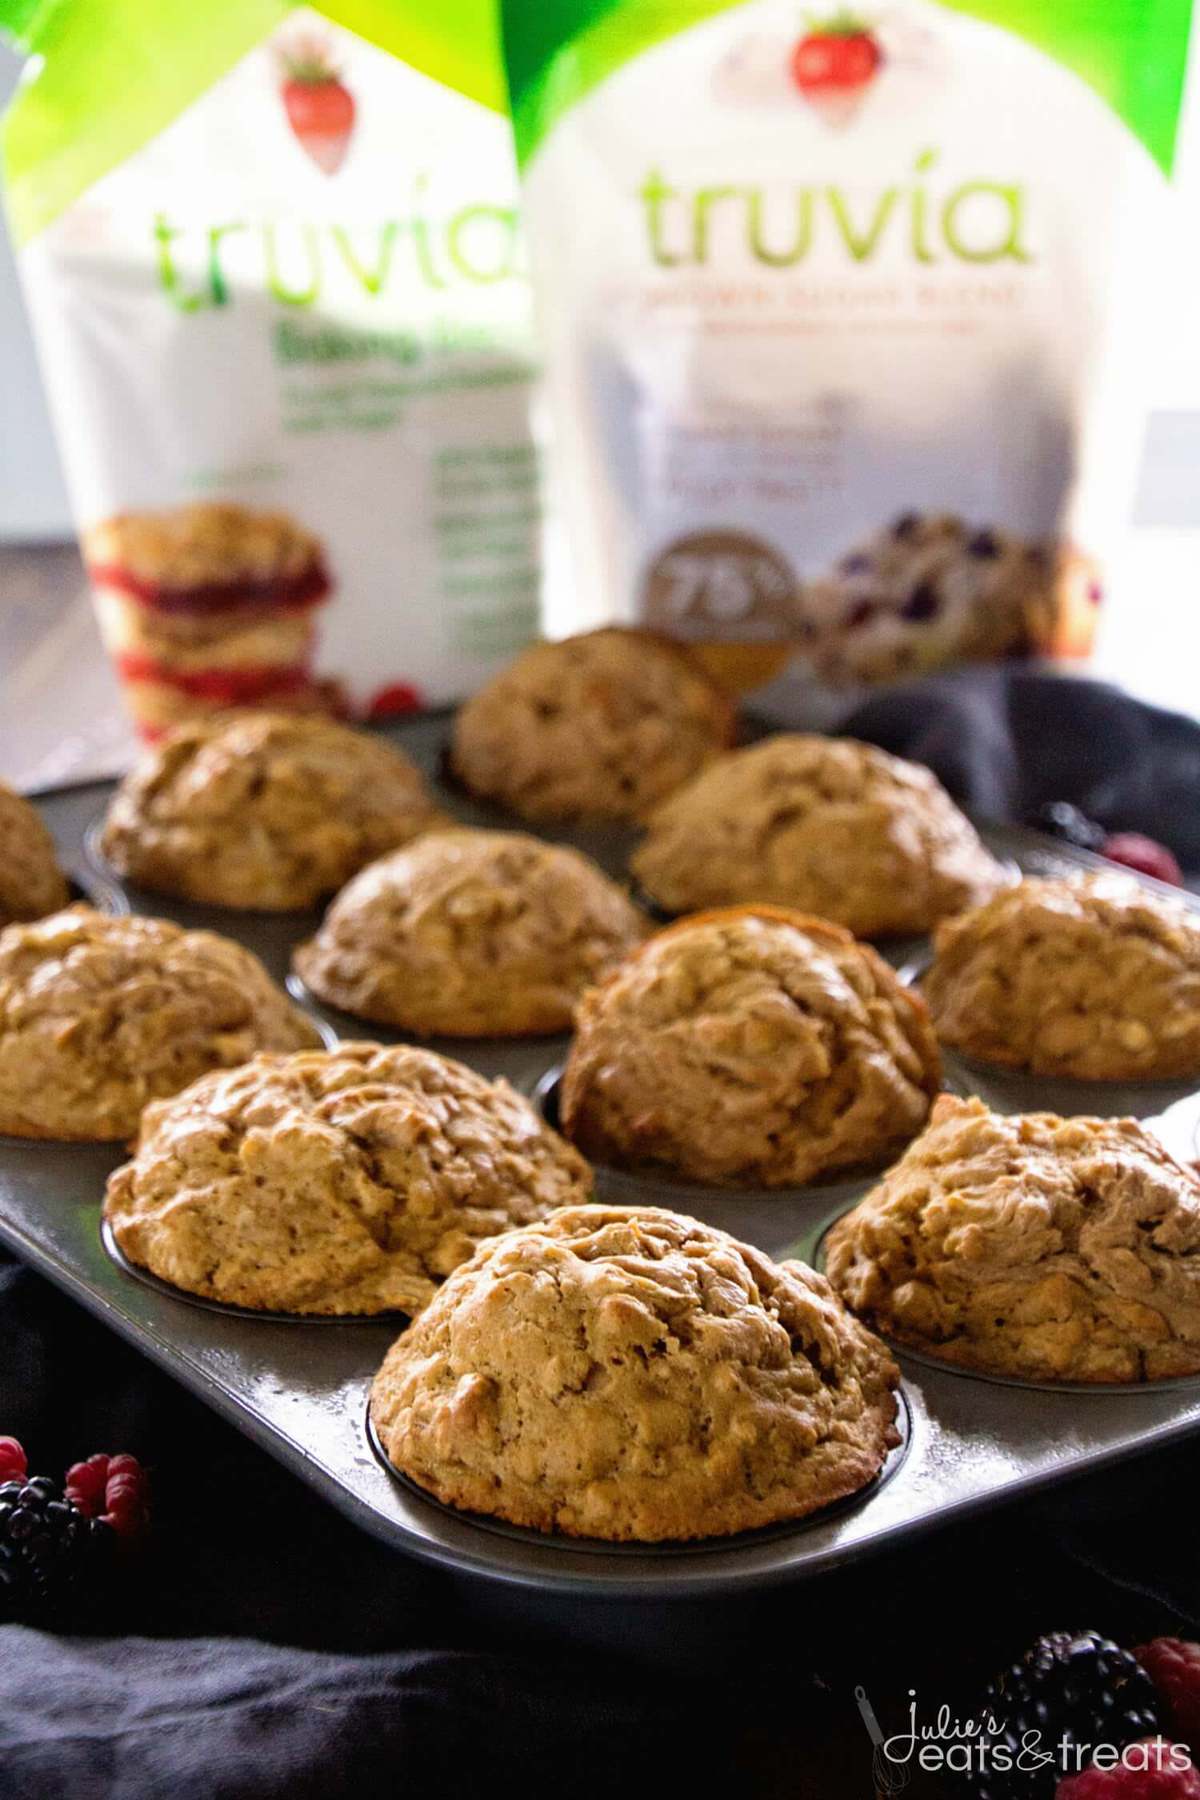 Healthier Peanut Butter Banana Muffins ~ This Peanut Butter and Banana Combo Muffin is so Delicious! They are made with Whole Wheat Flour and Oats to Fill You Up at Breakfast!